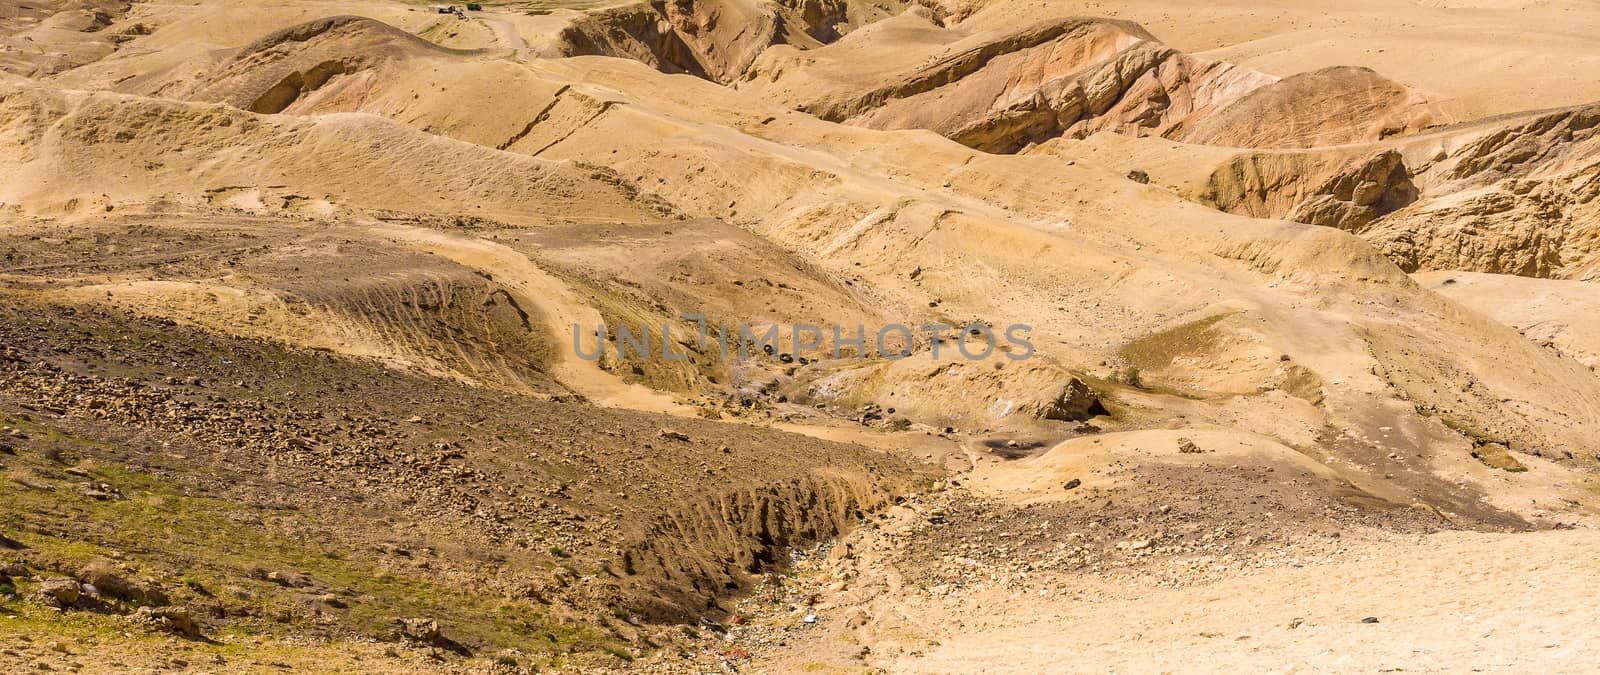 Stone desert in Jordan, hostile landscape next to the Kings Highway in front of Wadi Mujib, deeply cut into the landscape, middle east